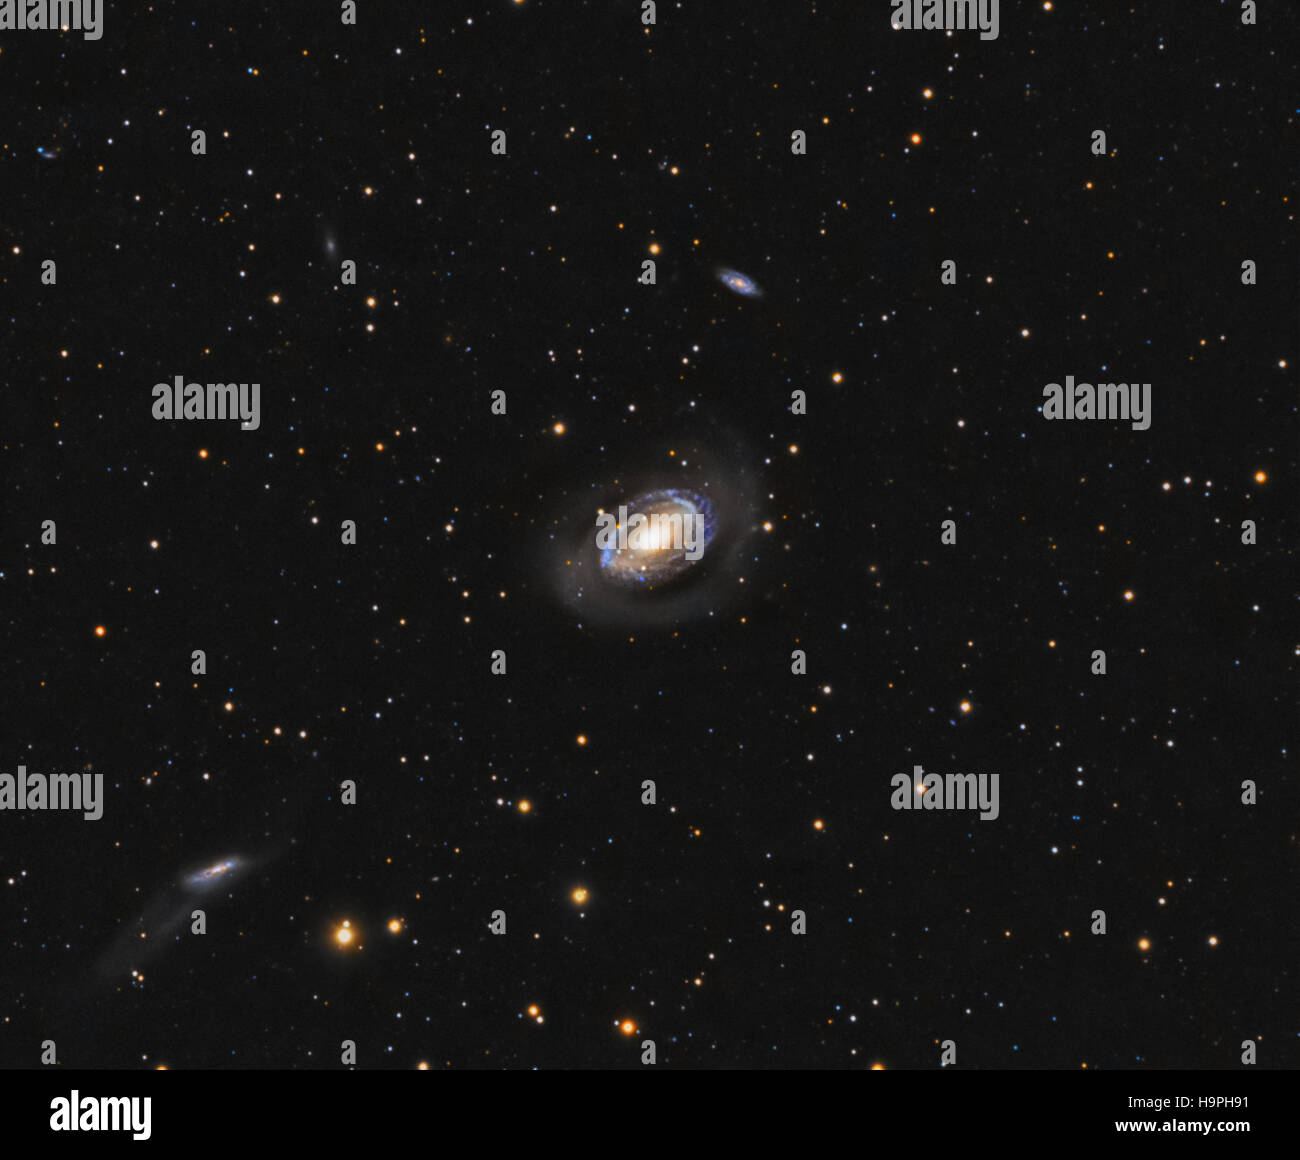 Galaxies in Coma Berenices constellation, ngc 4725, distant barred galaxy  - taken with specialized camera Stock Photo